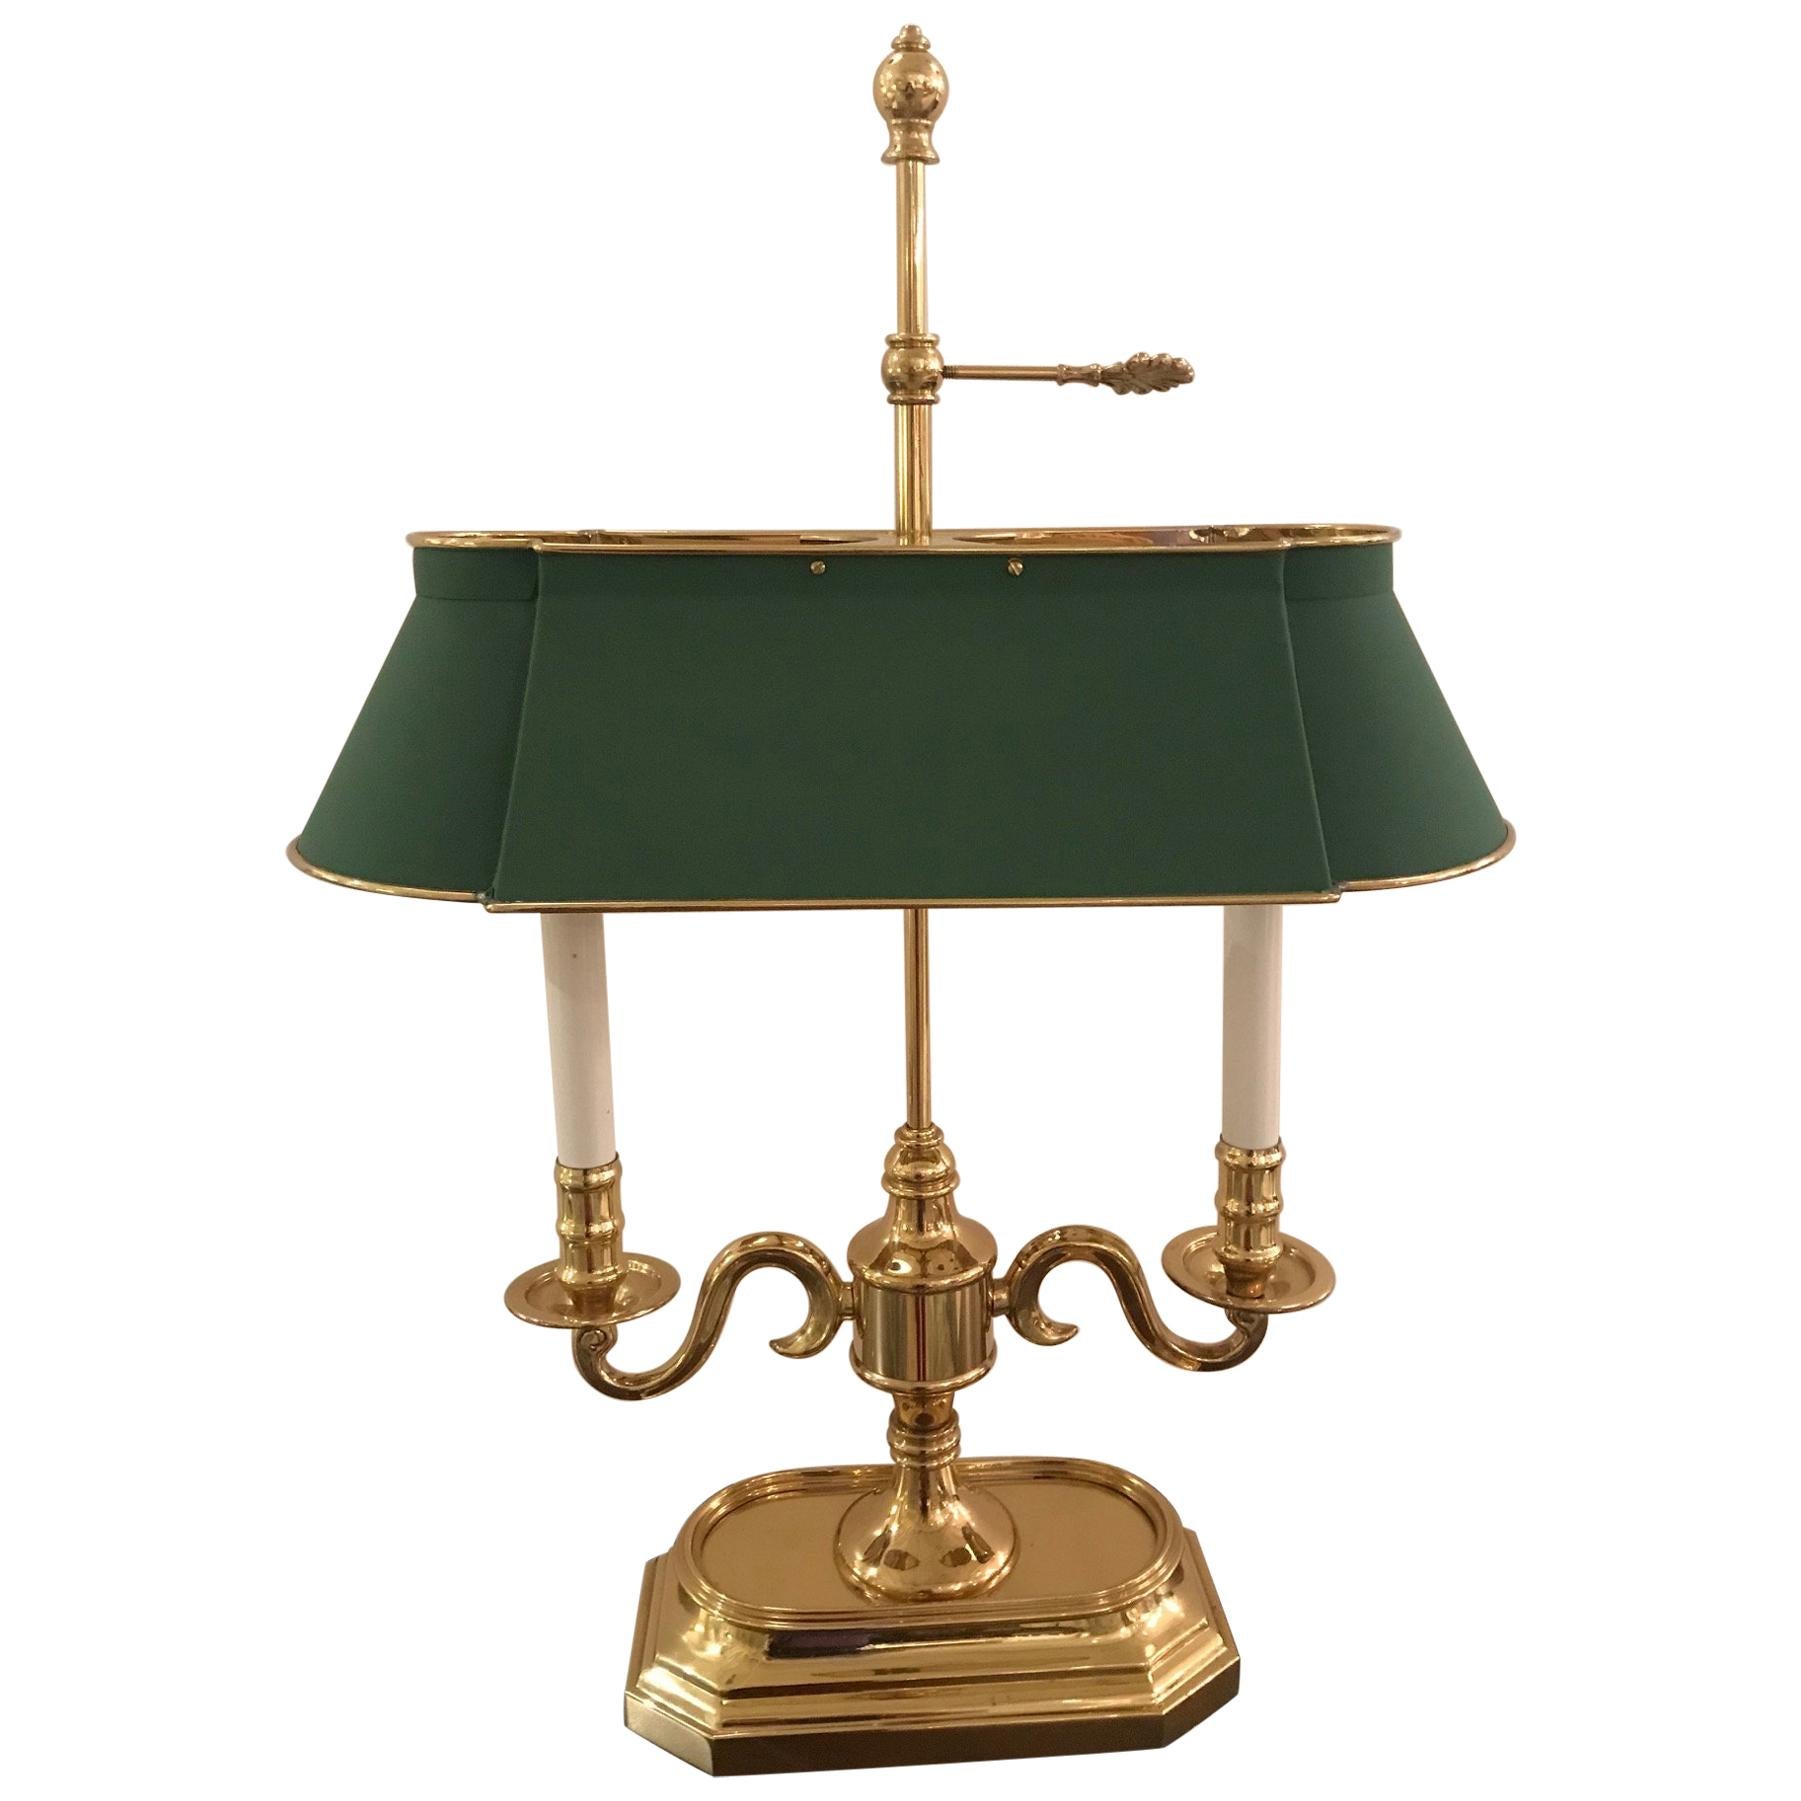 Two-Arm Brass Table Lamp with Green Metal Shade